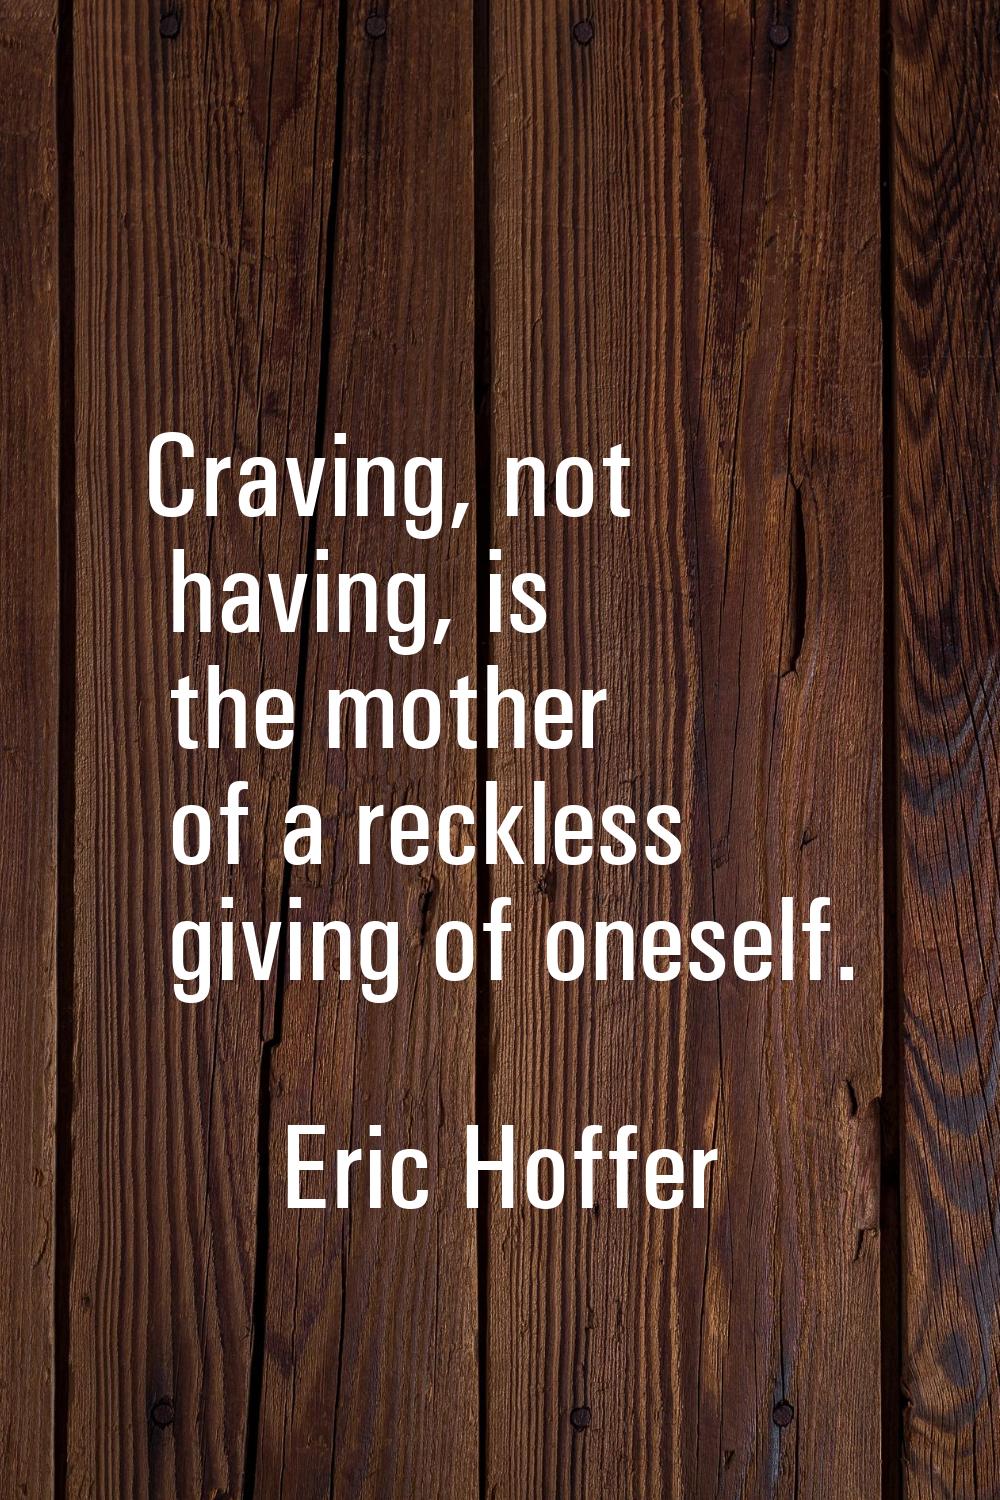 Craving, not having, is the mother of a reckless giving of oneself.